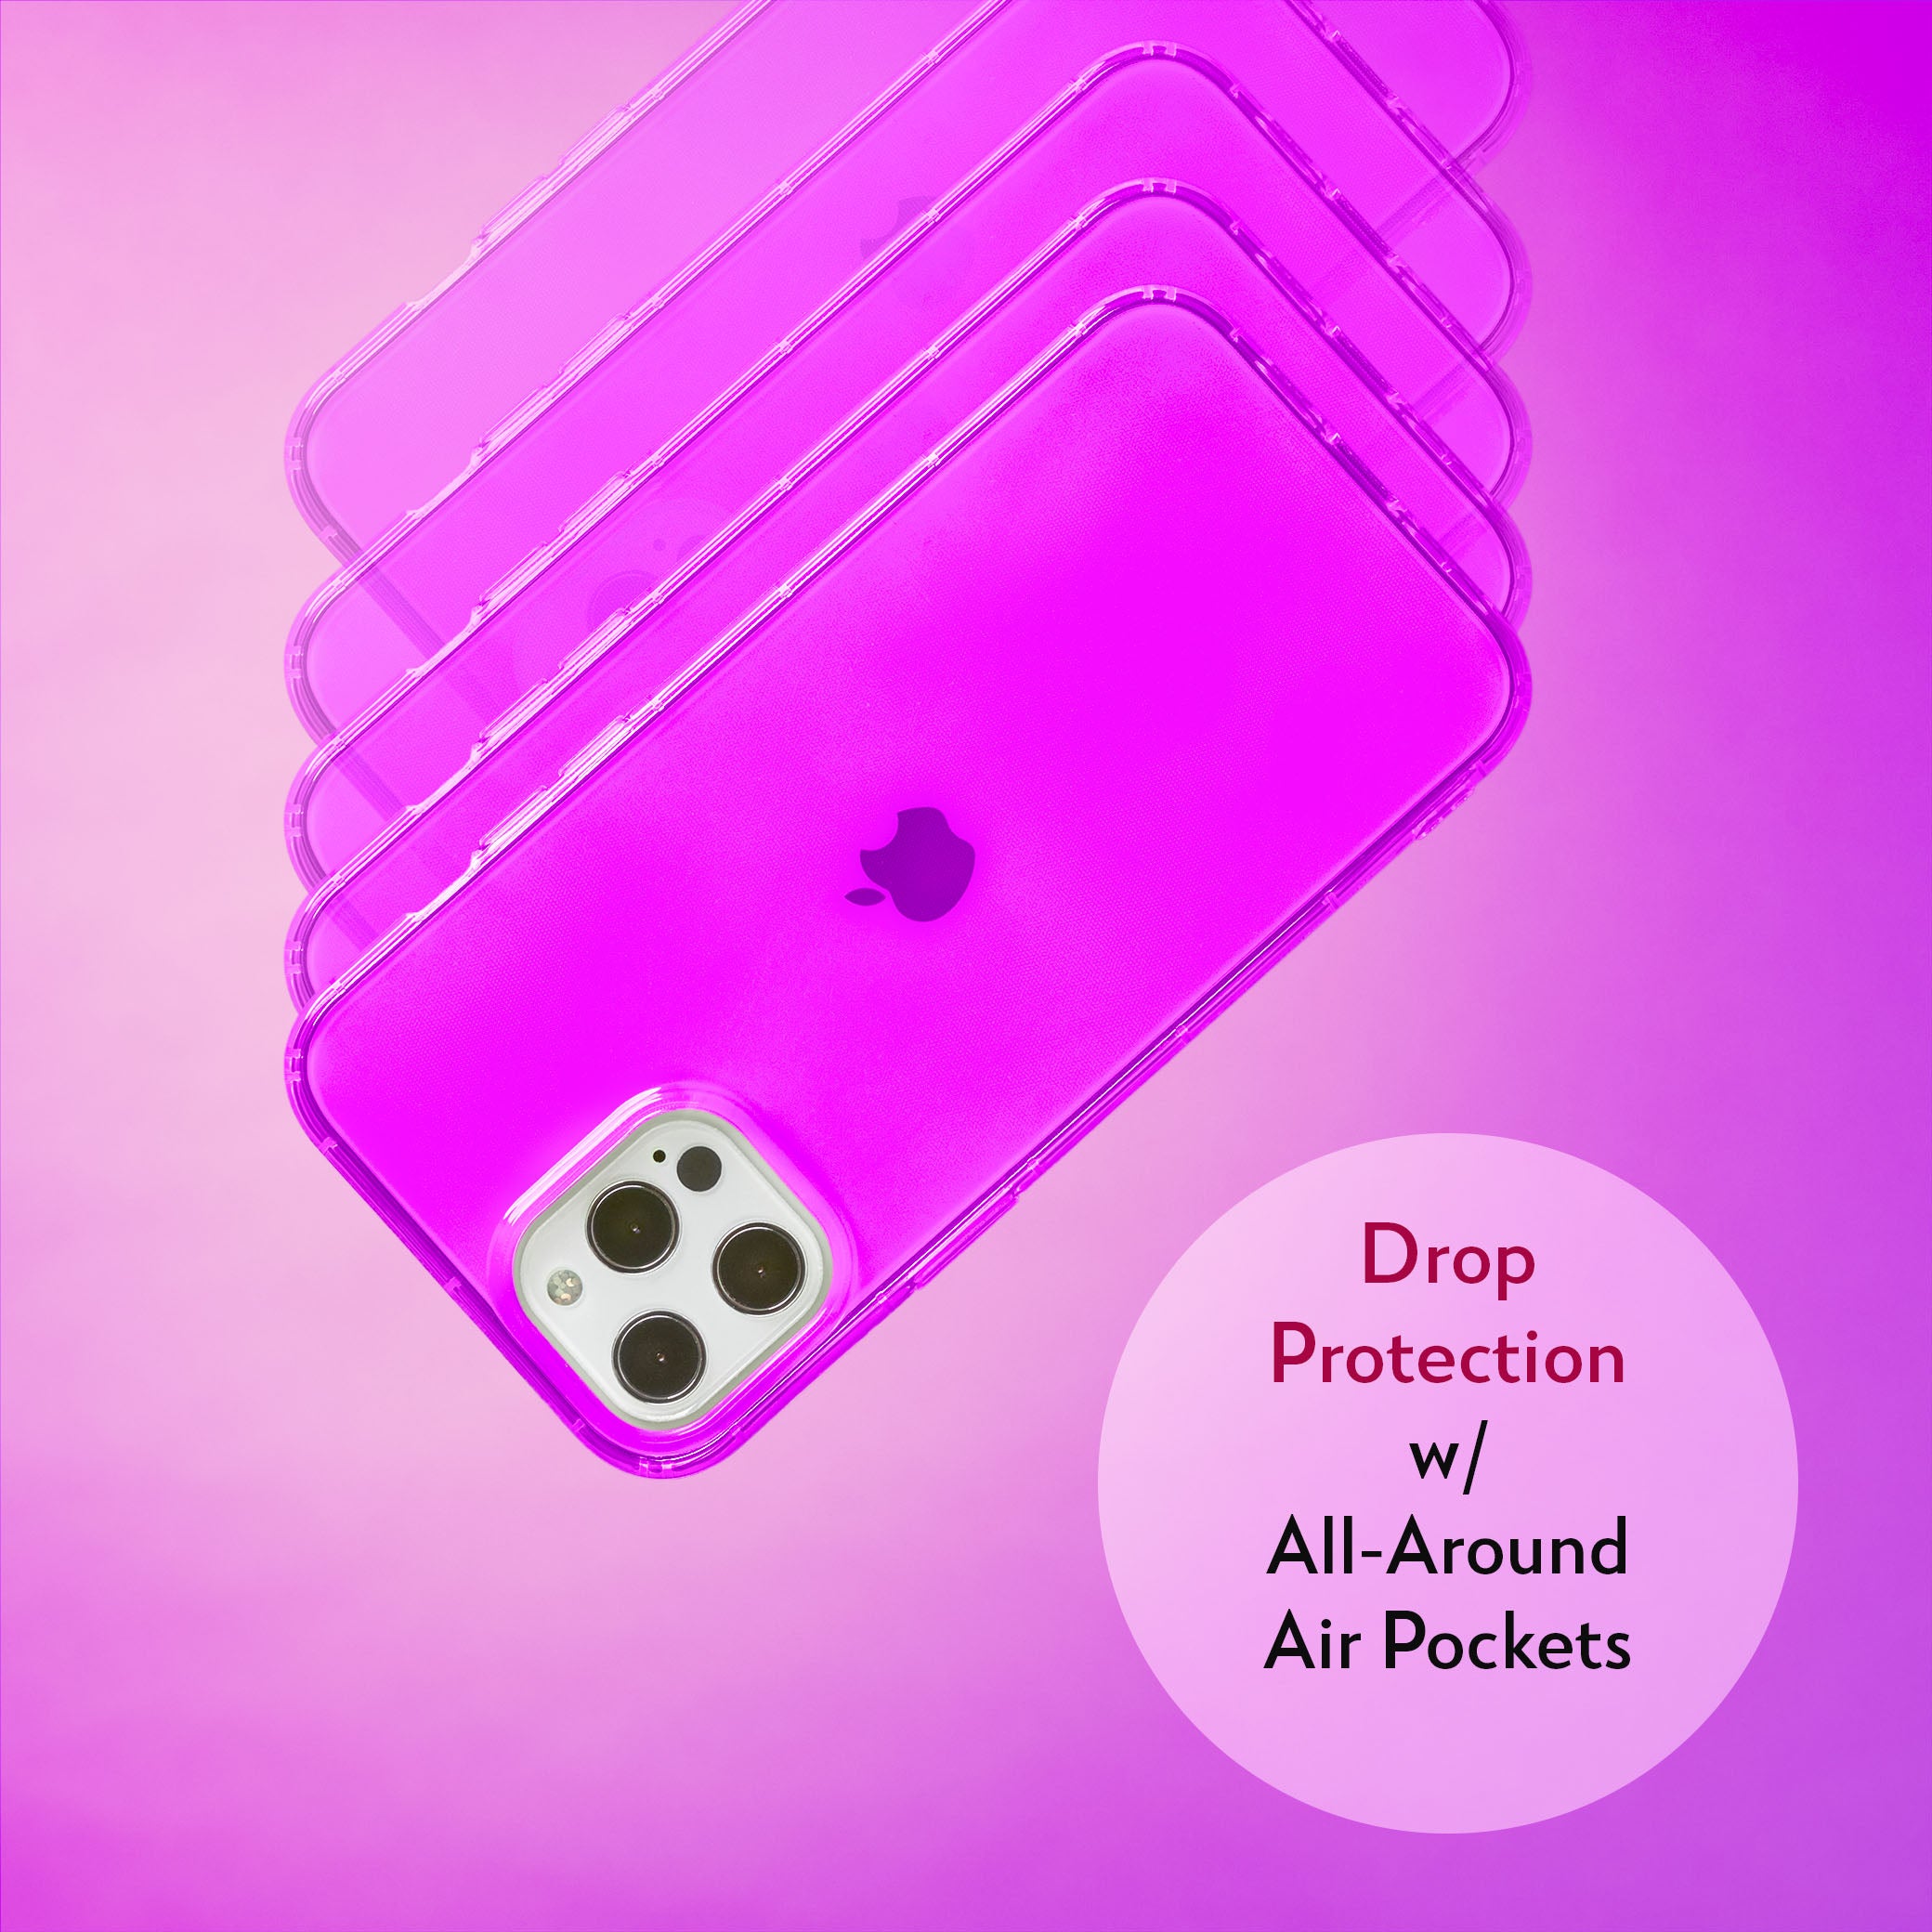 Highlighter Case for iPhone 12 Pro Max - Saturated Vivid Purple